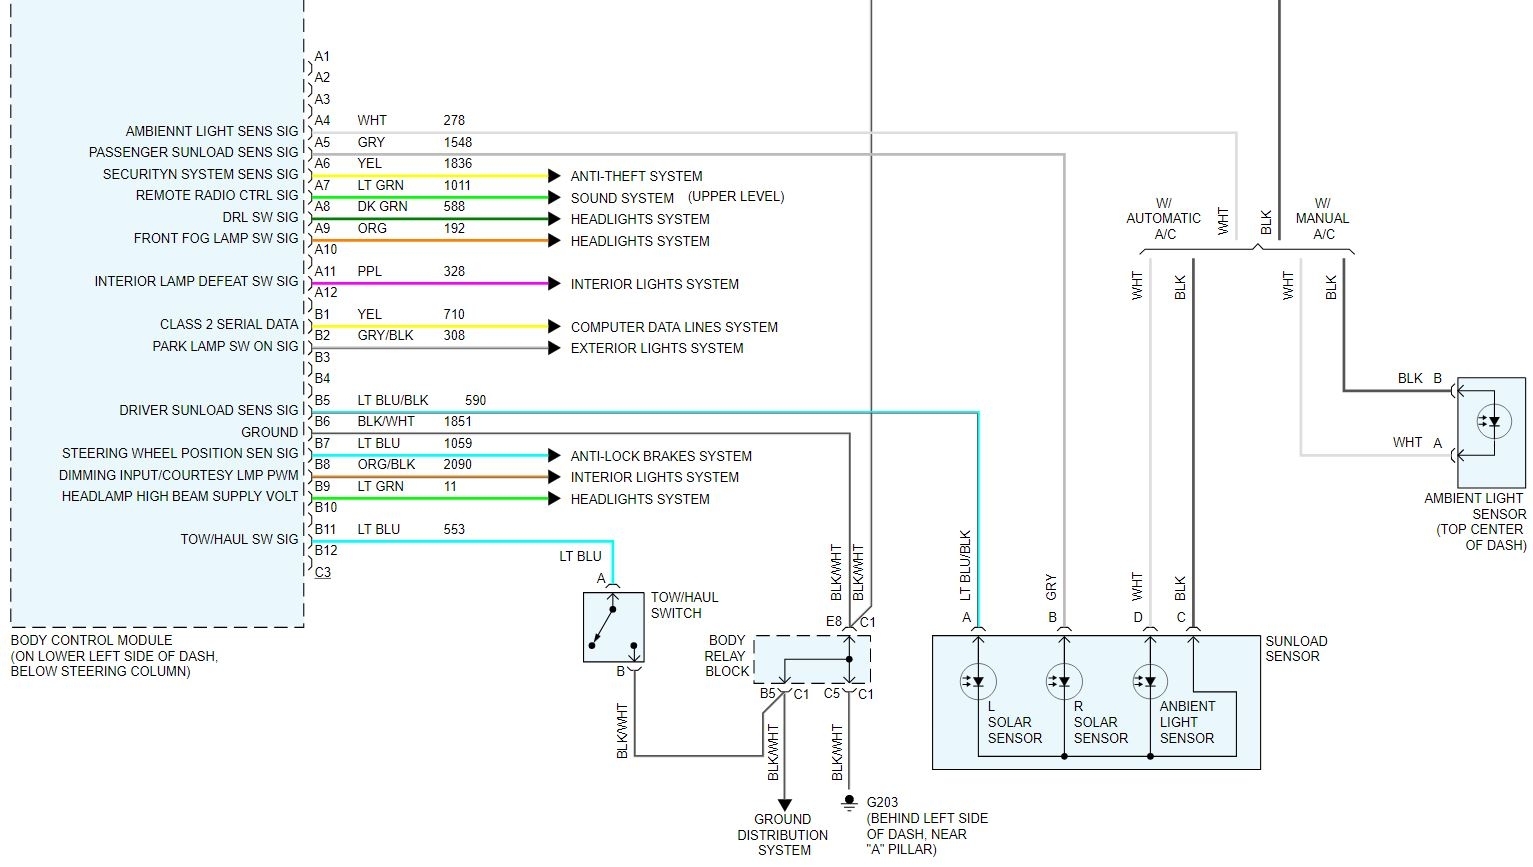 Body Control Module Wiring Diagrams And